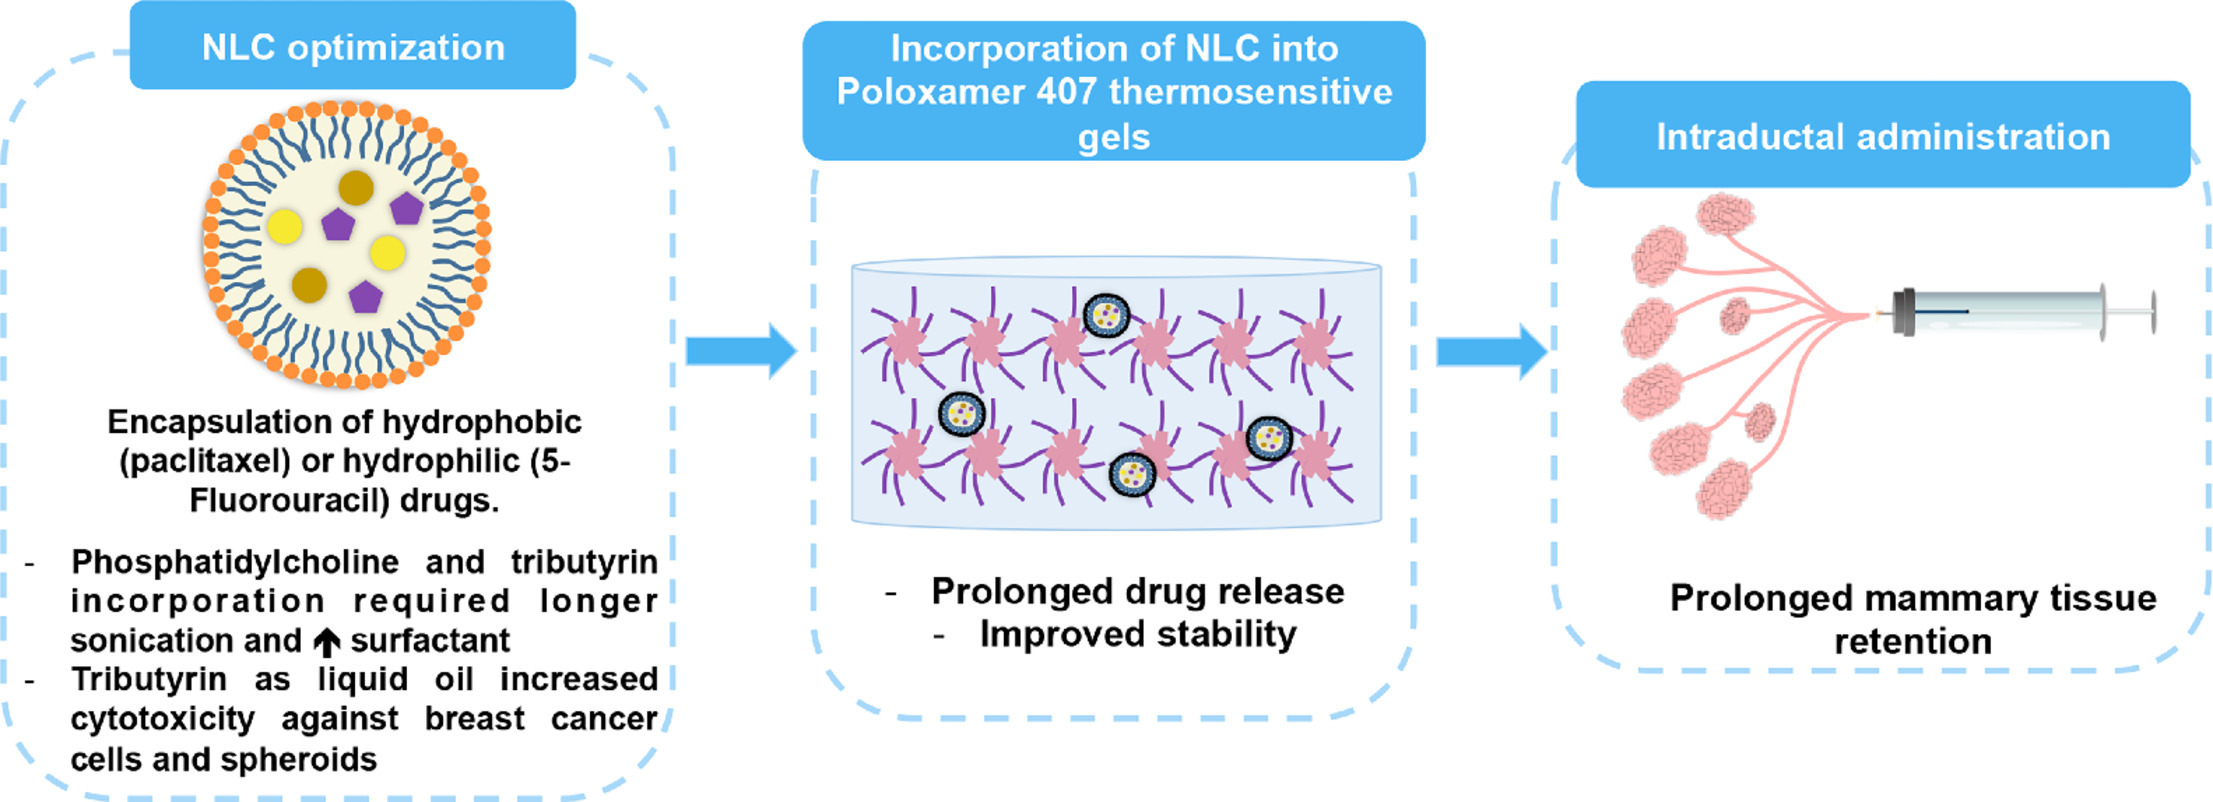 Nanostructured lipid carriers loaded into in situ gels for breast cancer local treatment